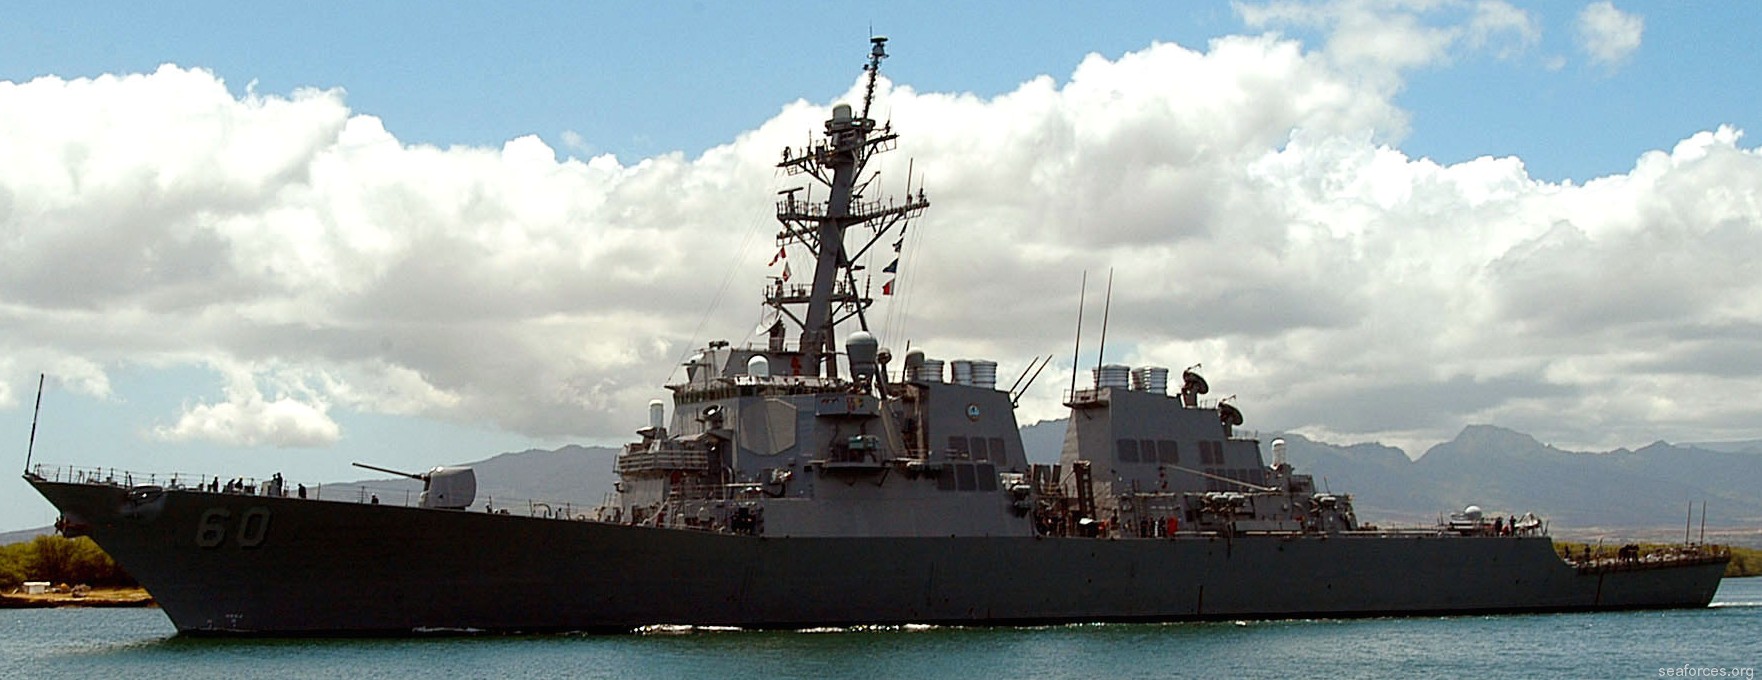 ddg-60 uss paul hamilton guided missile destroyer us navy 41